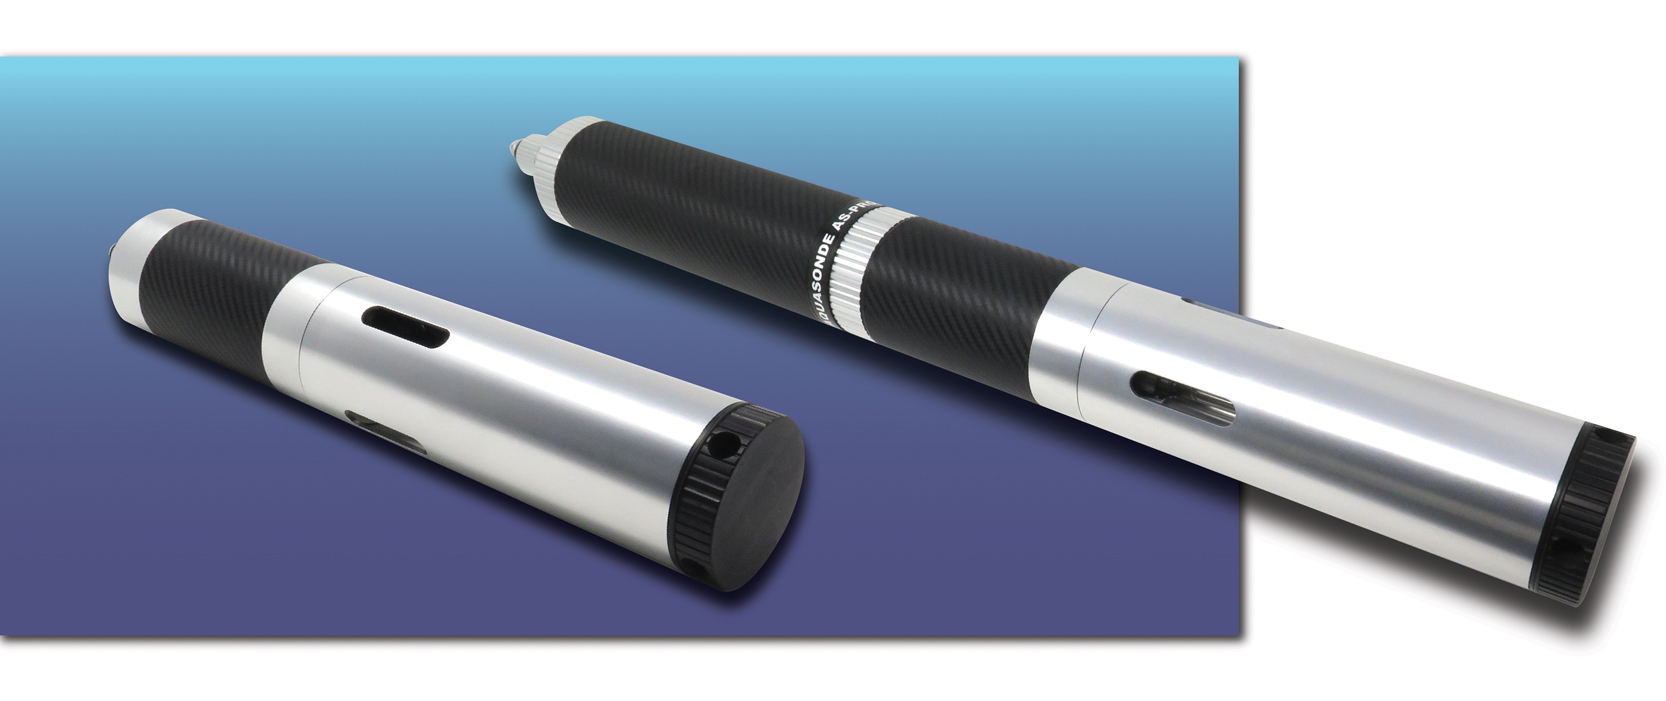 Rendering of the Aquasonde water monitoring equipment on a blue background